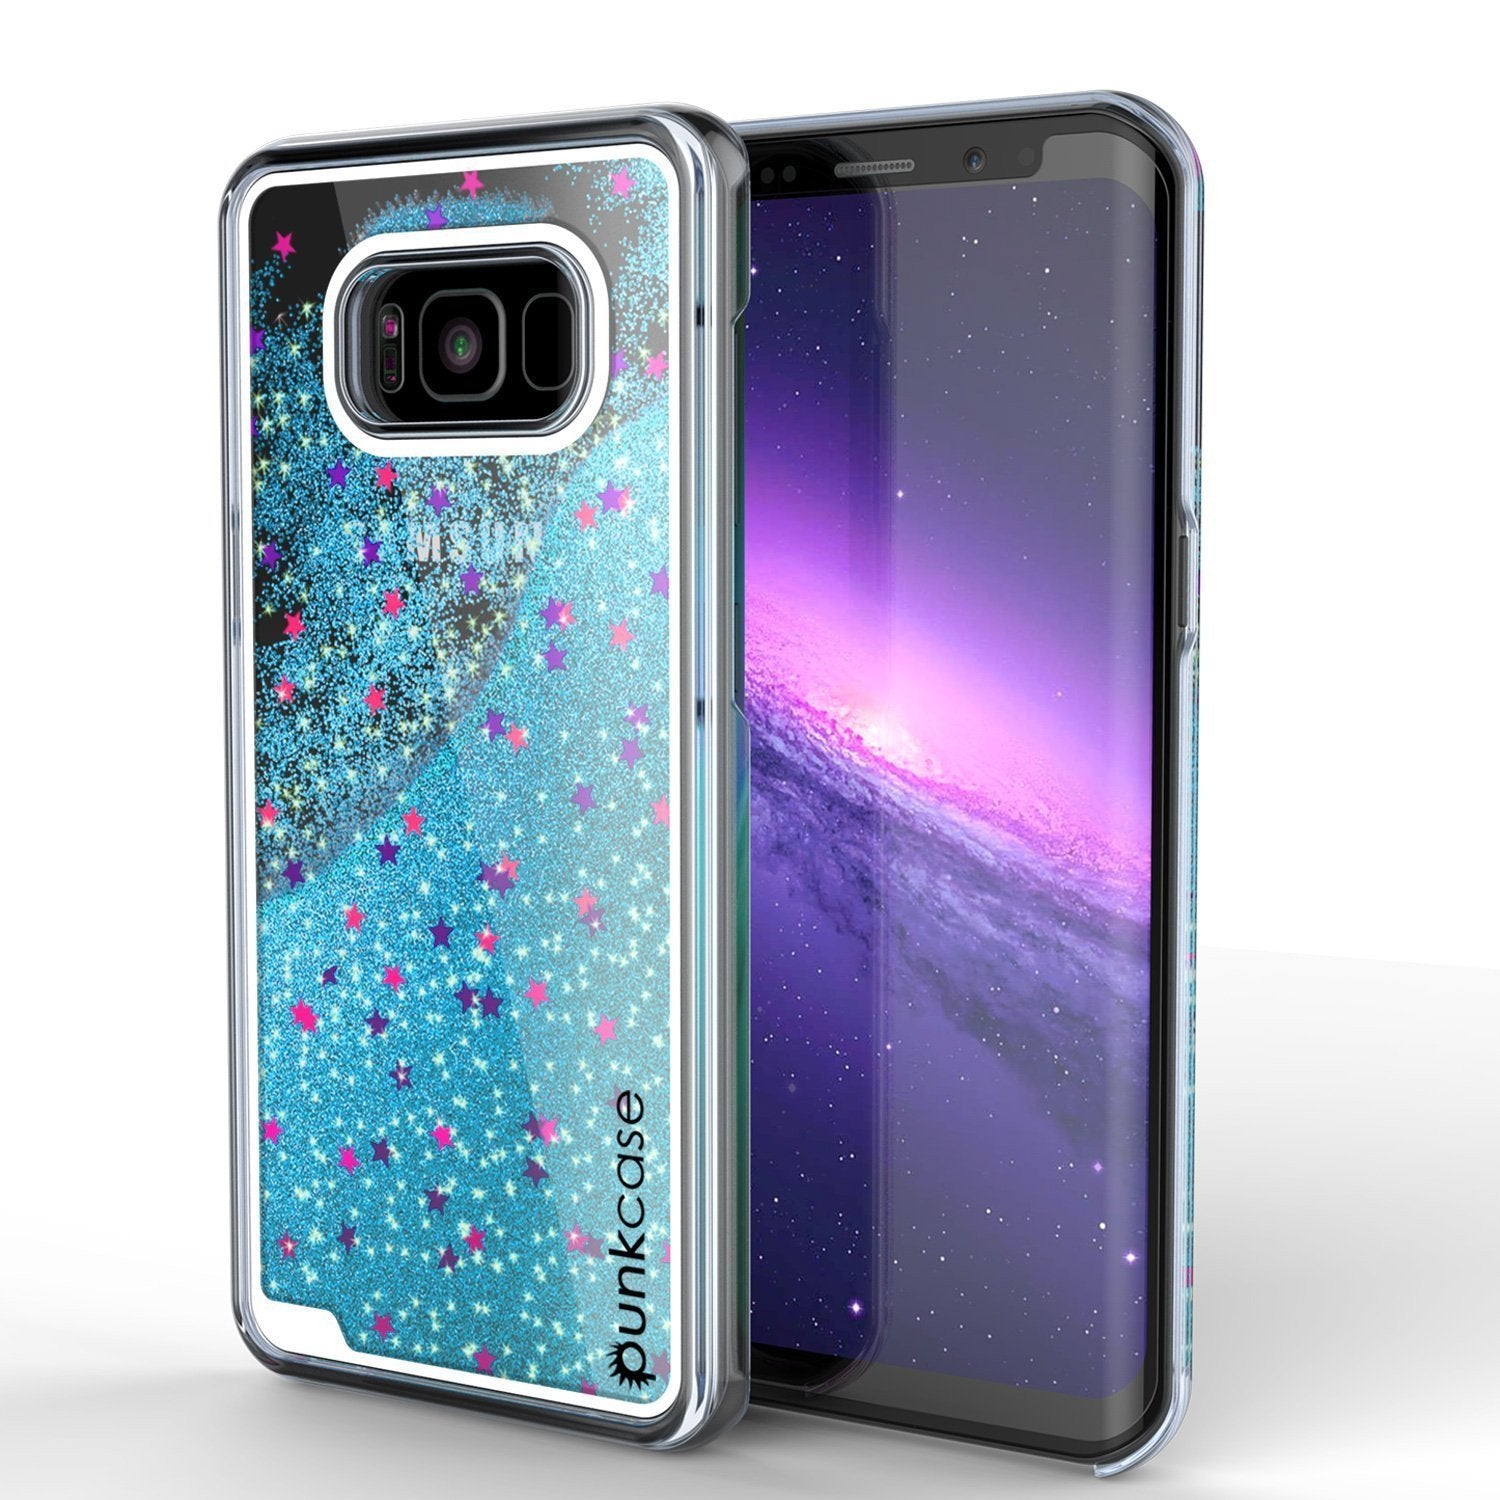 S8 Plus Case, Punkcase [Liquid Series] Protective Dual Layer Floating Glitter Cover with lots of Bling & Sparkle + PunkShield Screen Protector for Samsungs Galaxy S8+ [Teal]